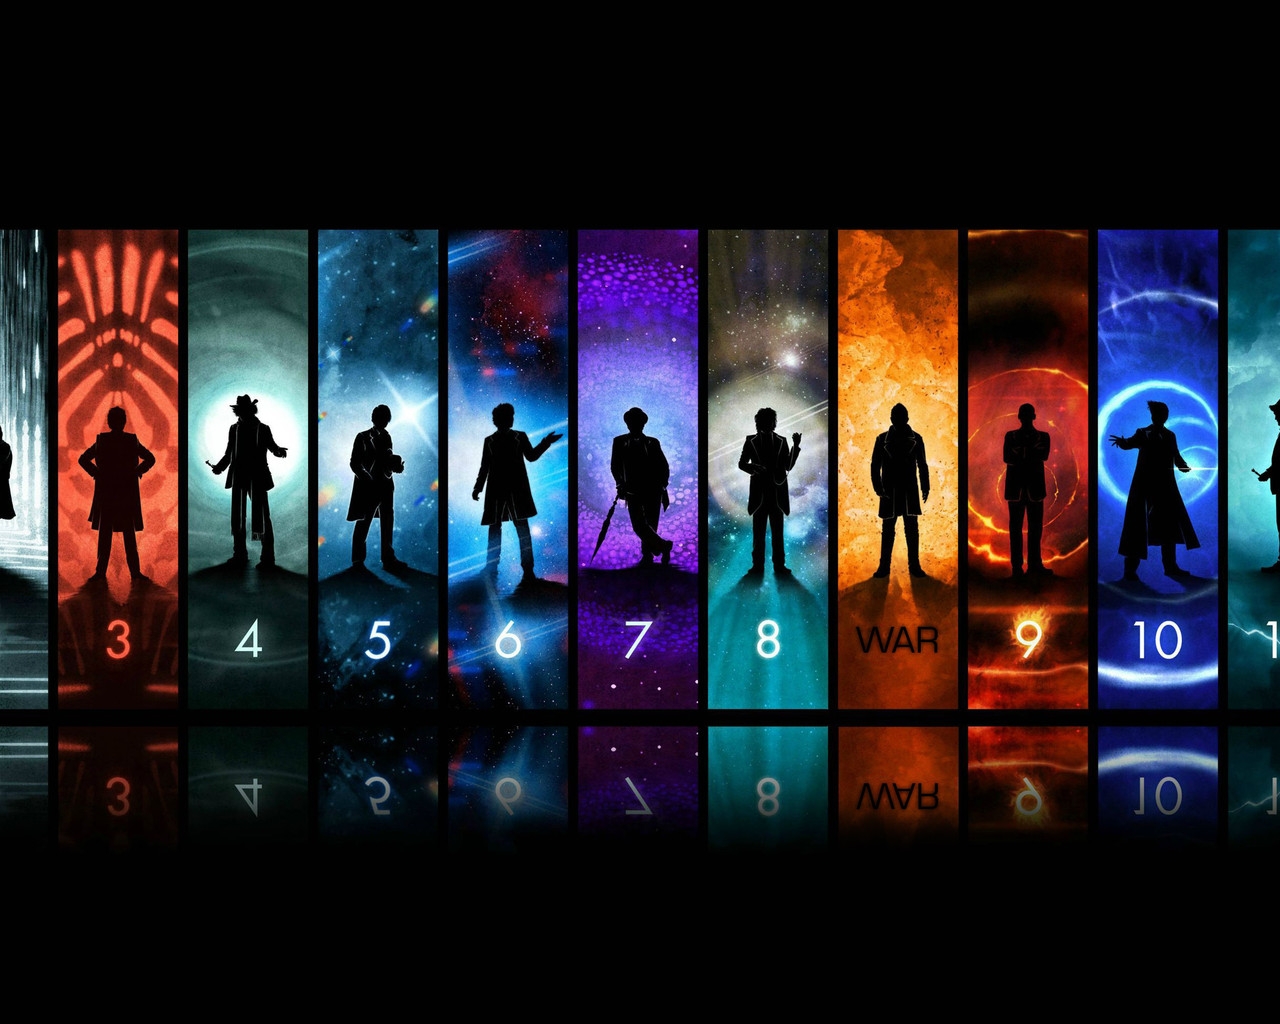 Heroes Reborn Characters for 1280 x 1024 resolution